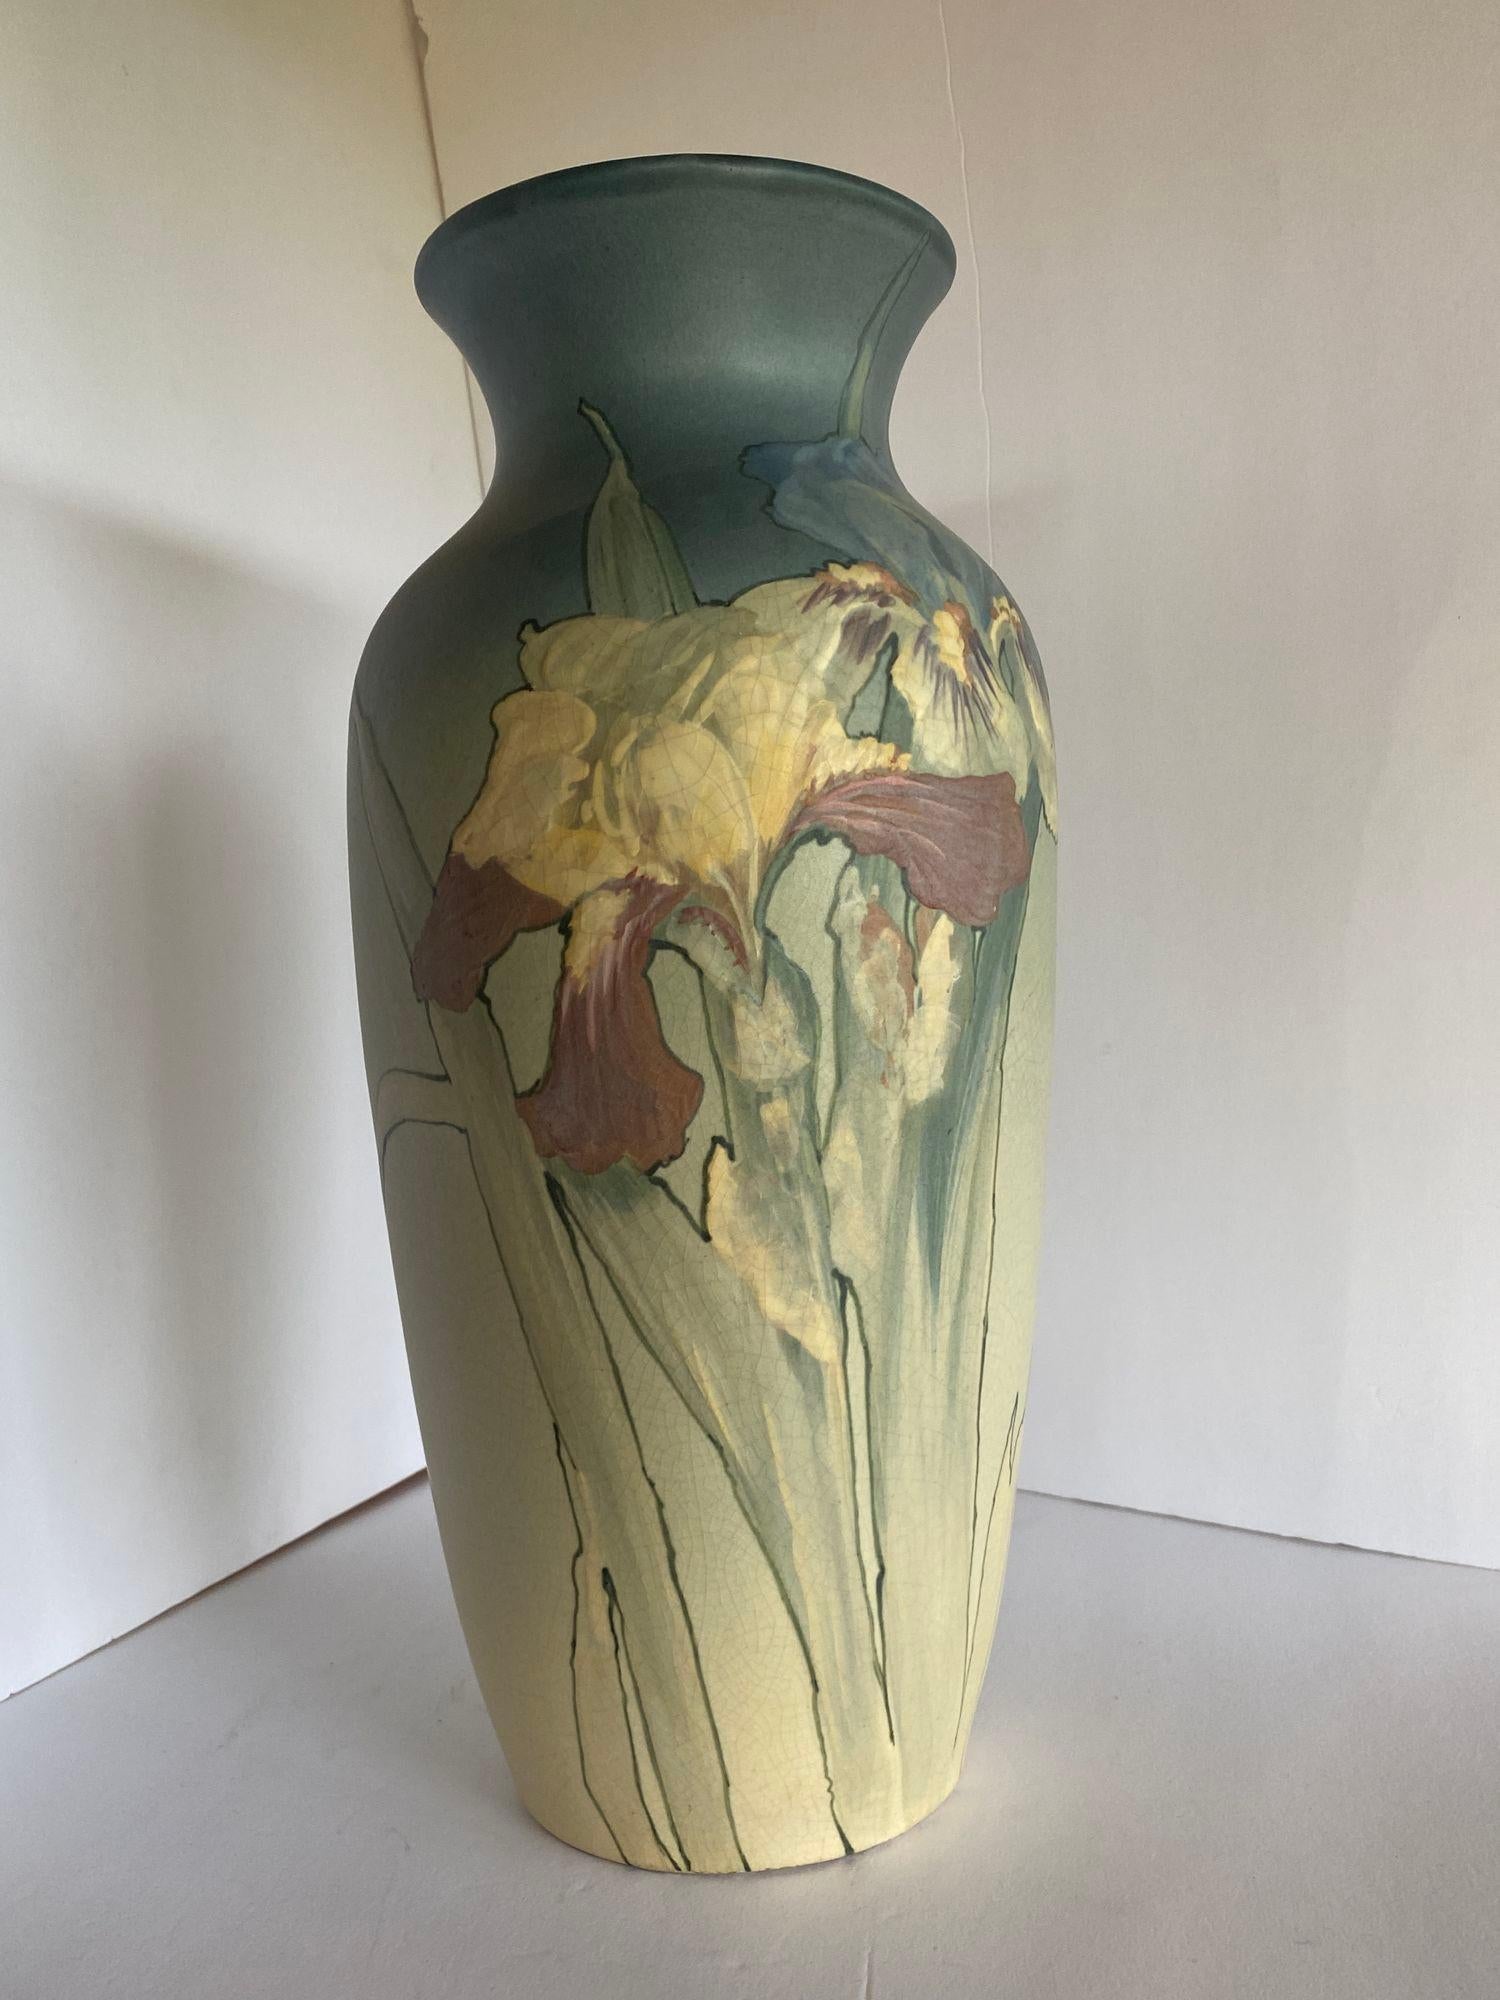 Art Nouveau Hand-Painted Art Pottery Vase by Weller Pottery In Excellent Condition For Sale In Van Nuys, CA